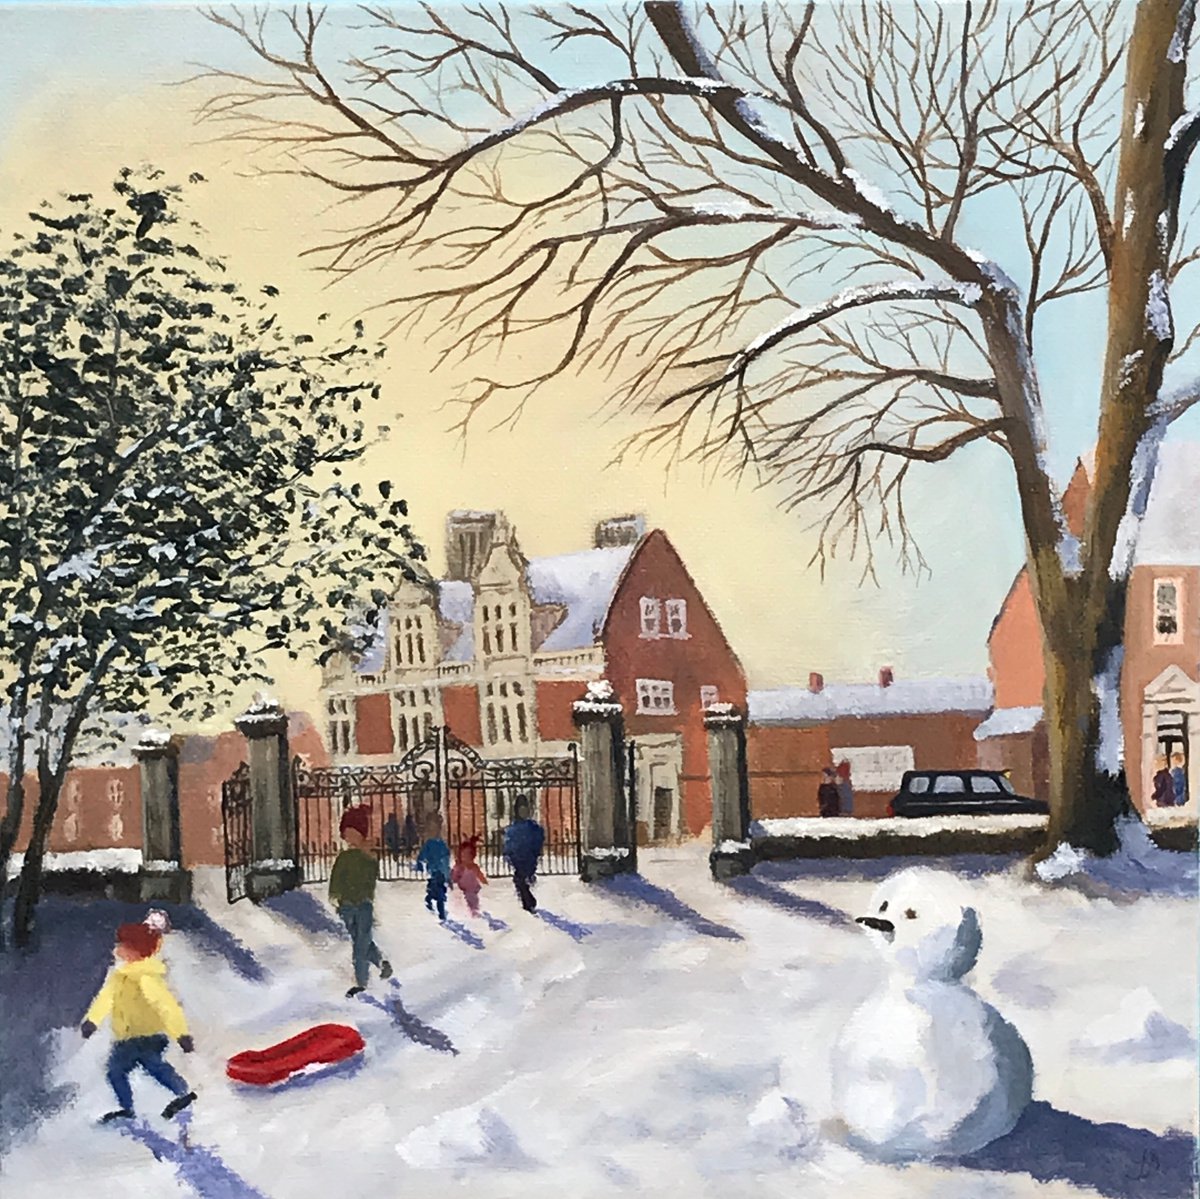 Snow in the Park by JANE DENTON